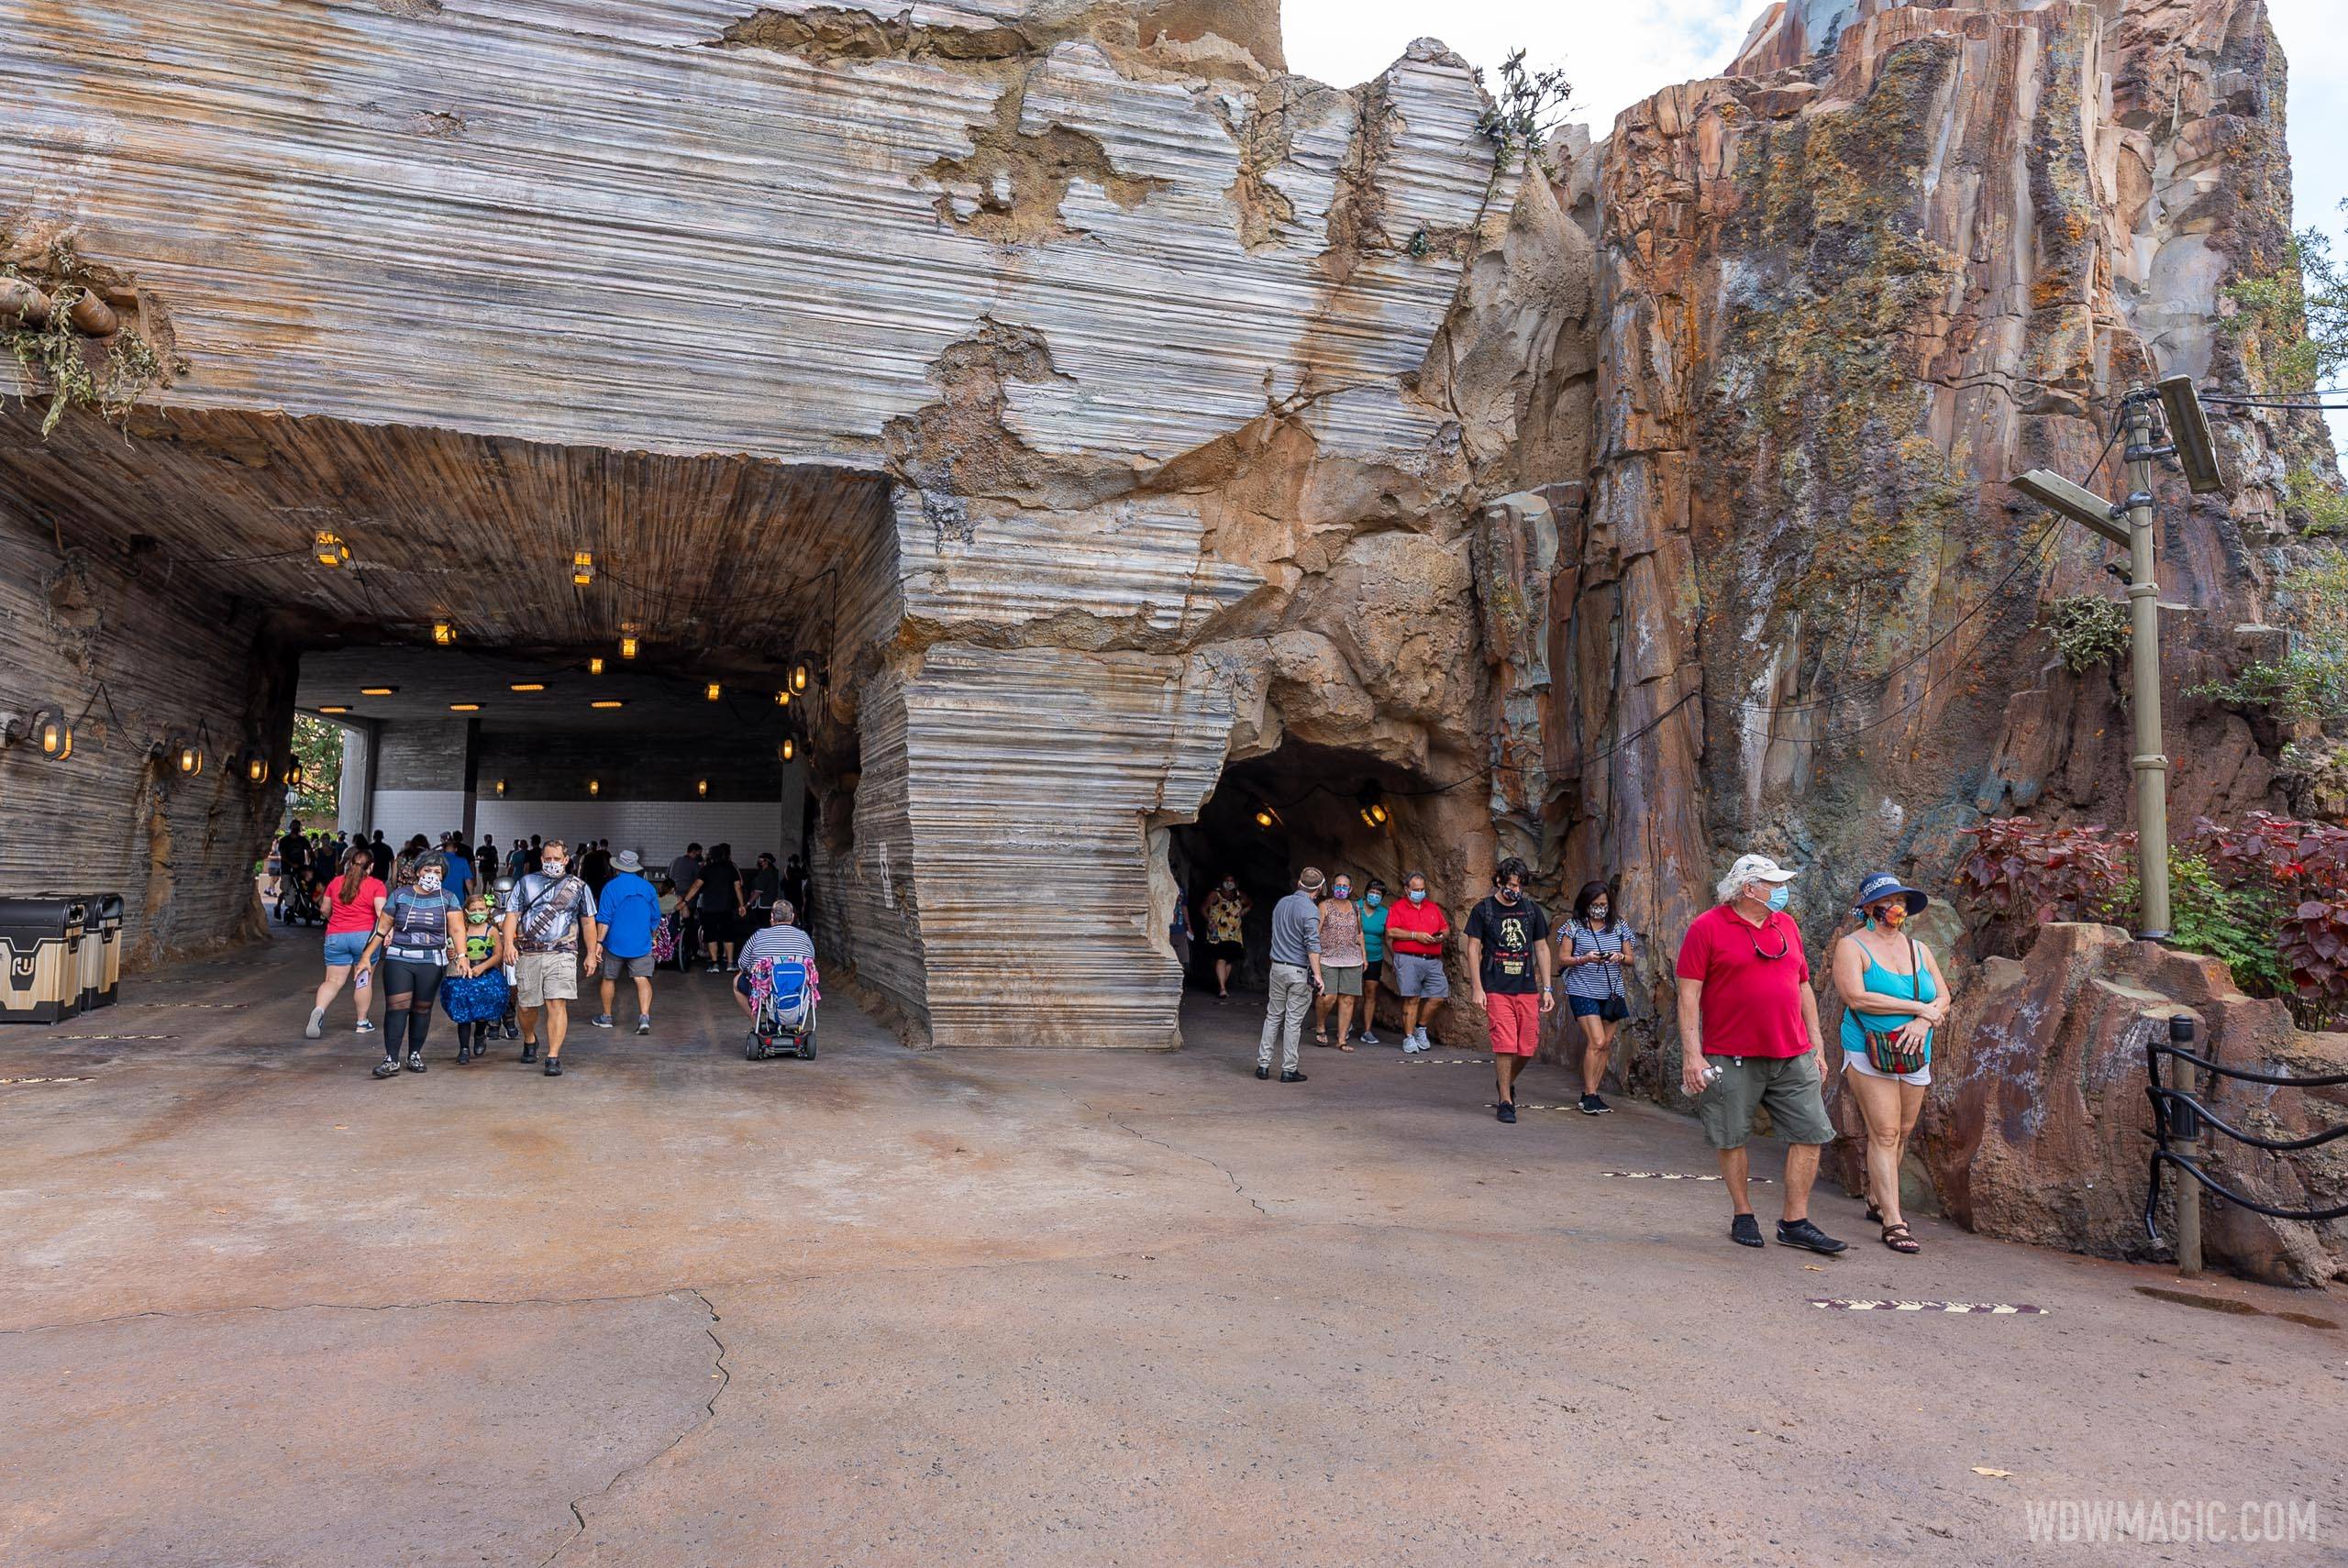 The lines start position varies but is often outside of Galaxy's Edge